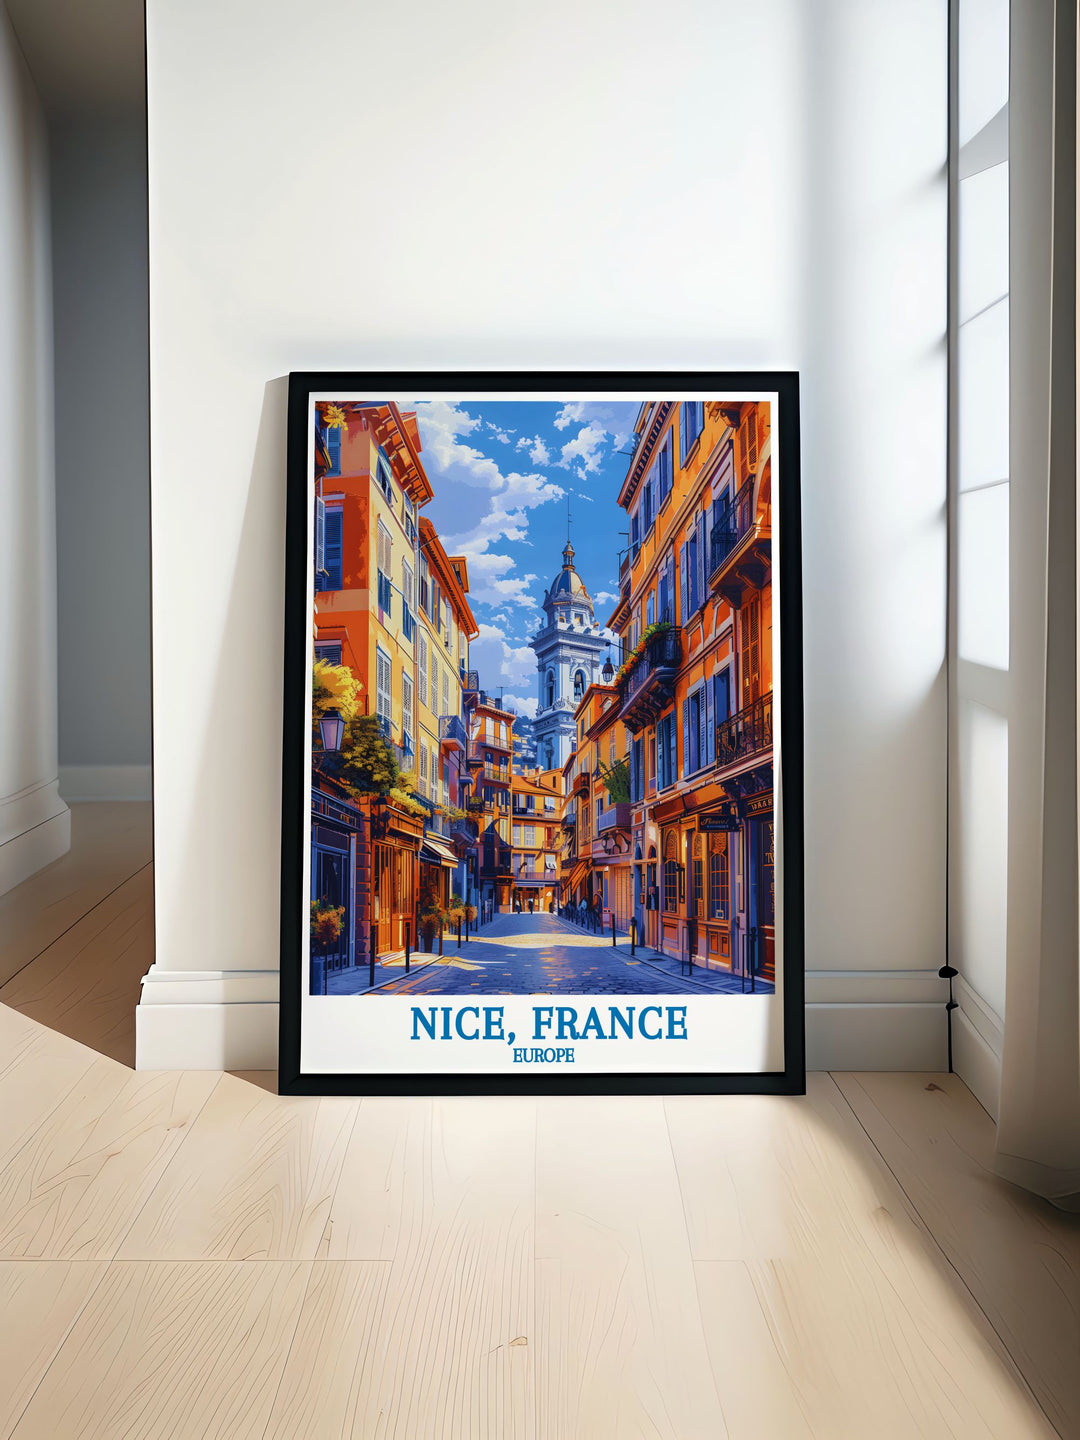 Enhance your living space with this travel poster of Old Town Vieux Nice, capturing the picturesque views and dynamic ambiance of this historic French district.